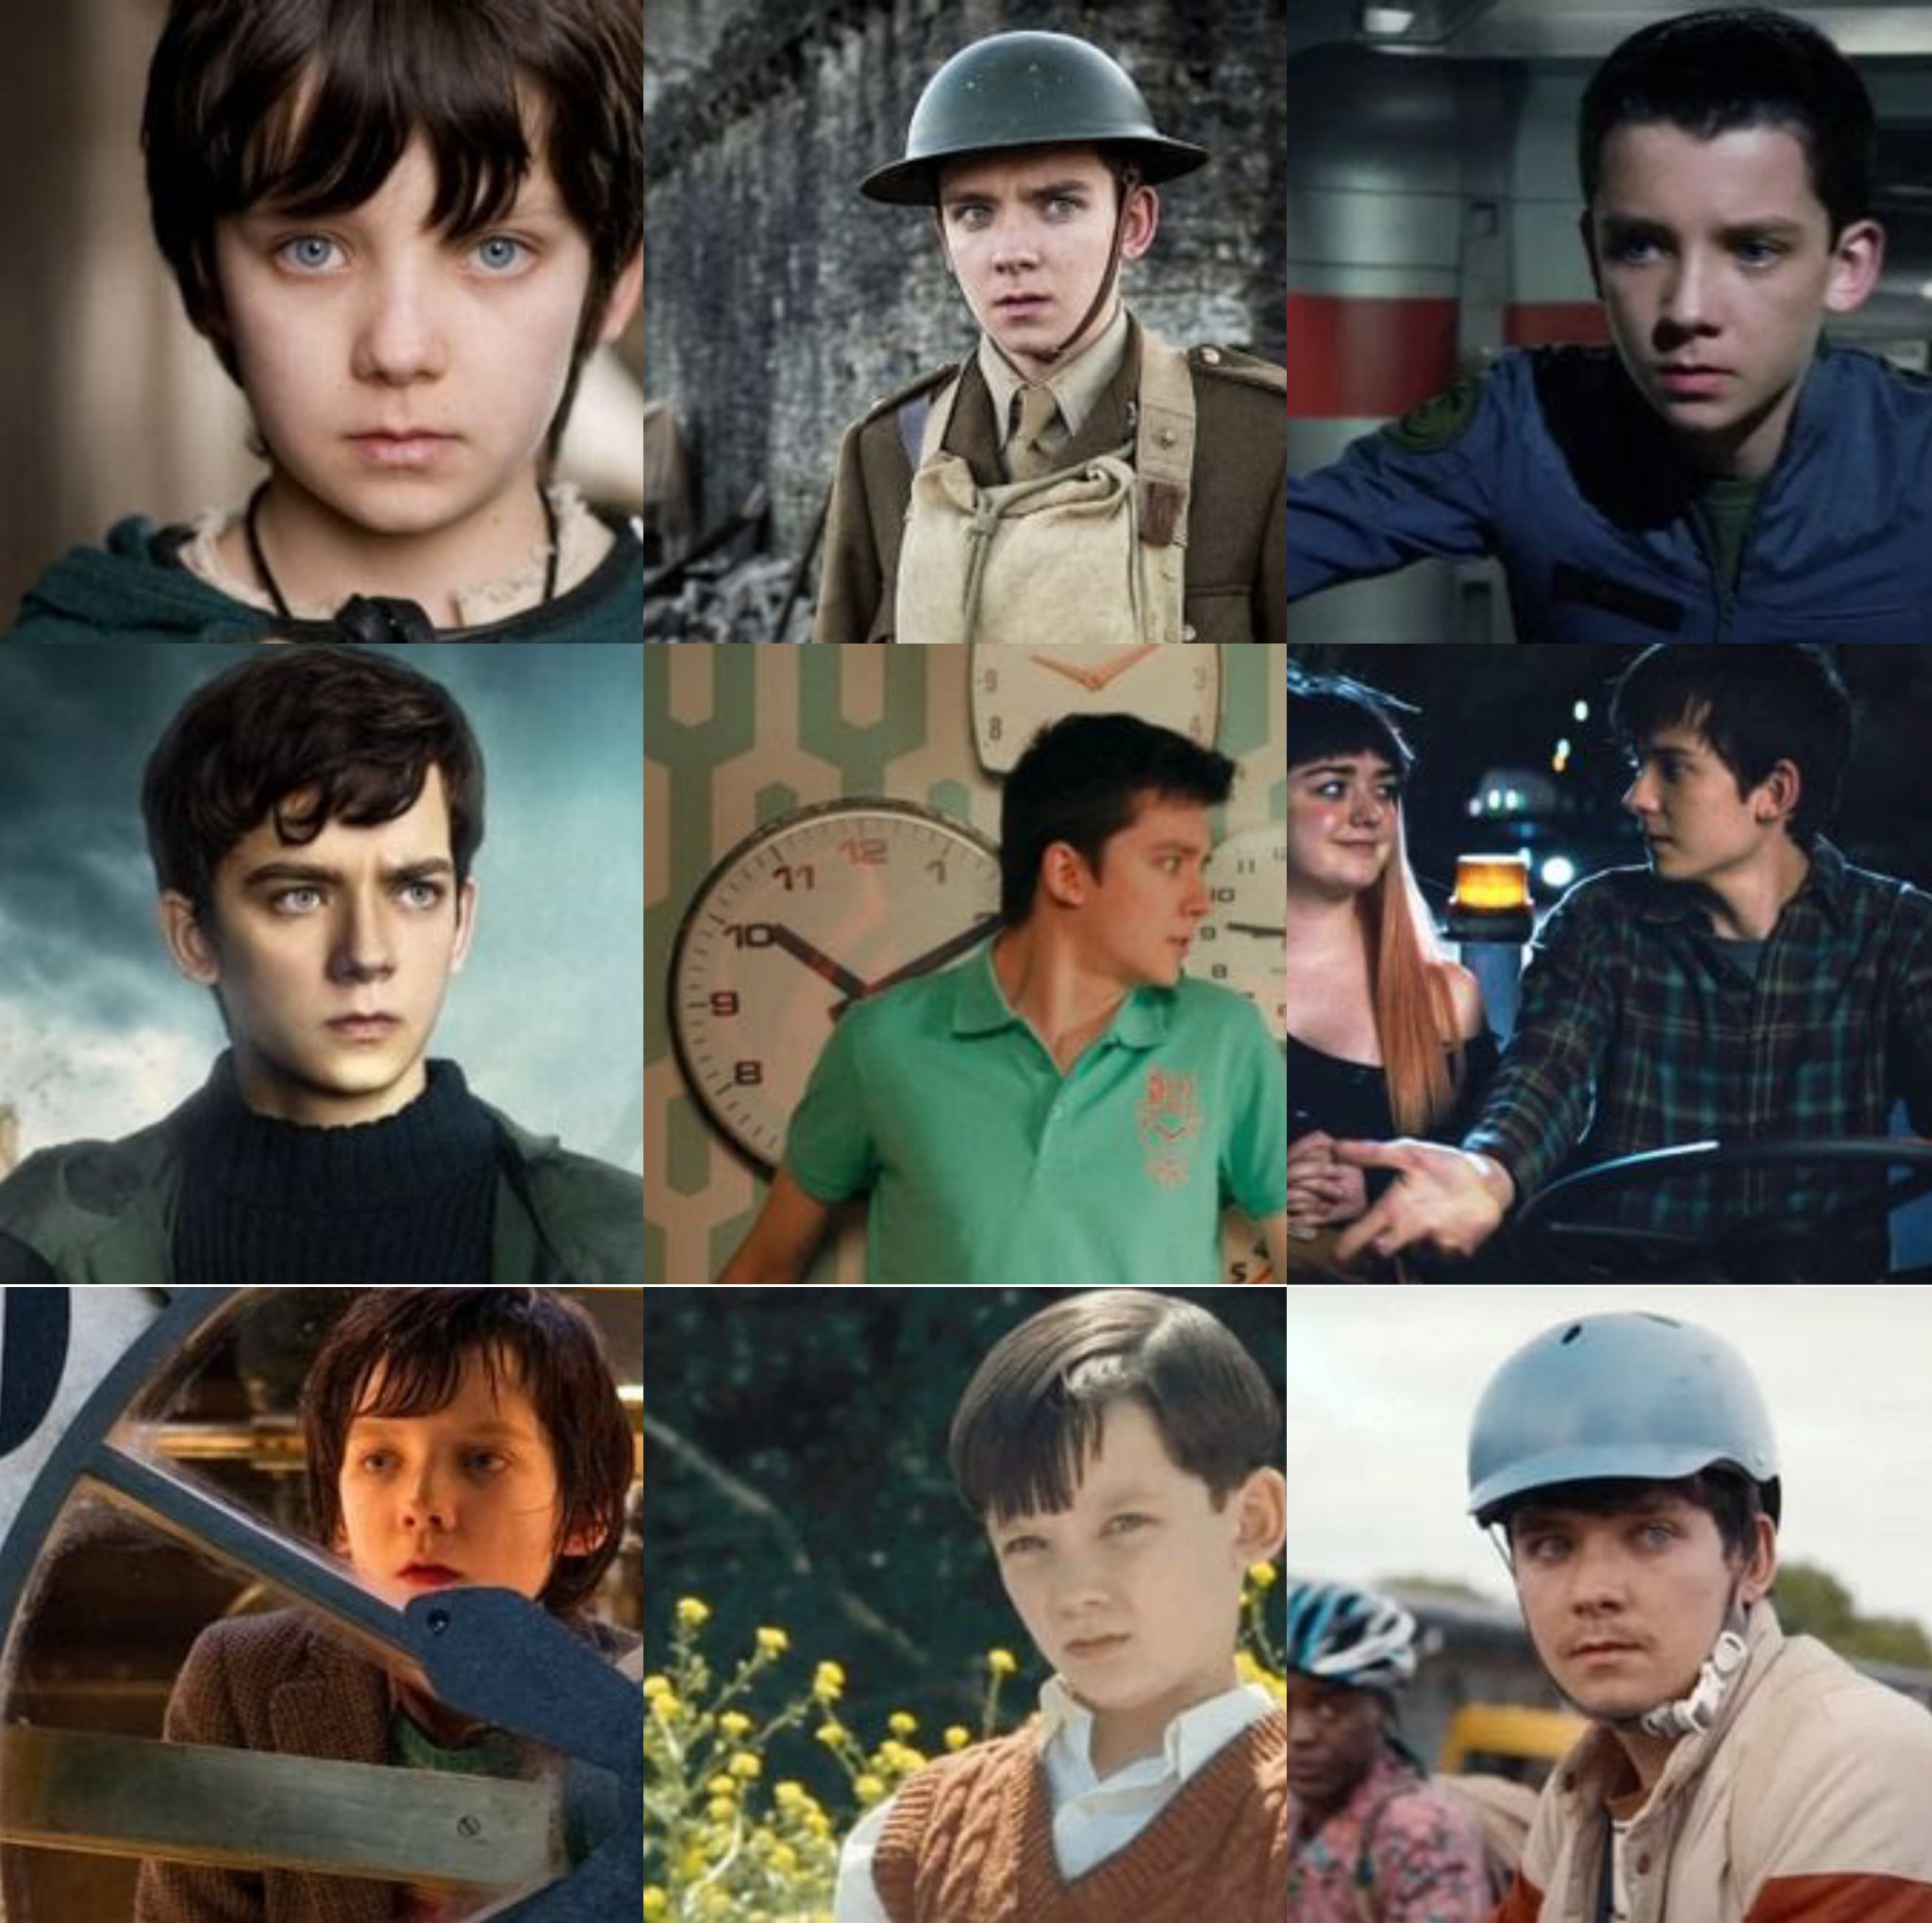 Happy 25th birthday to Asa Butterfield! 